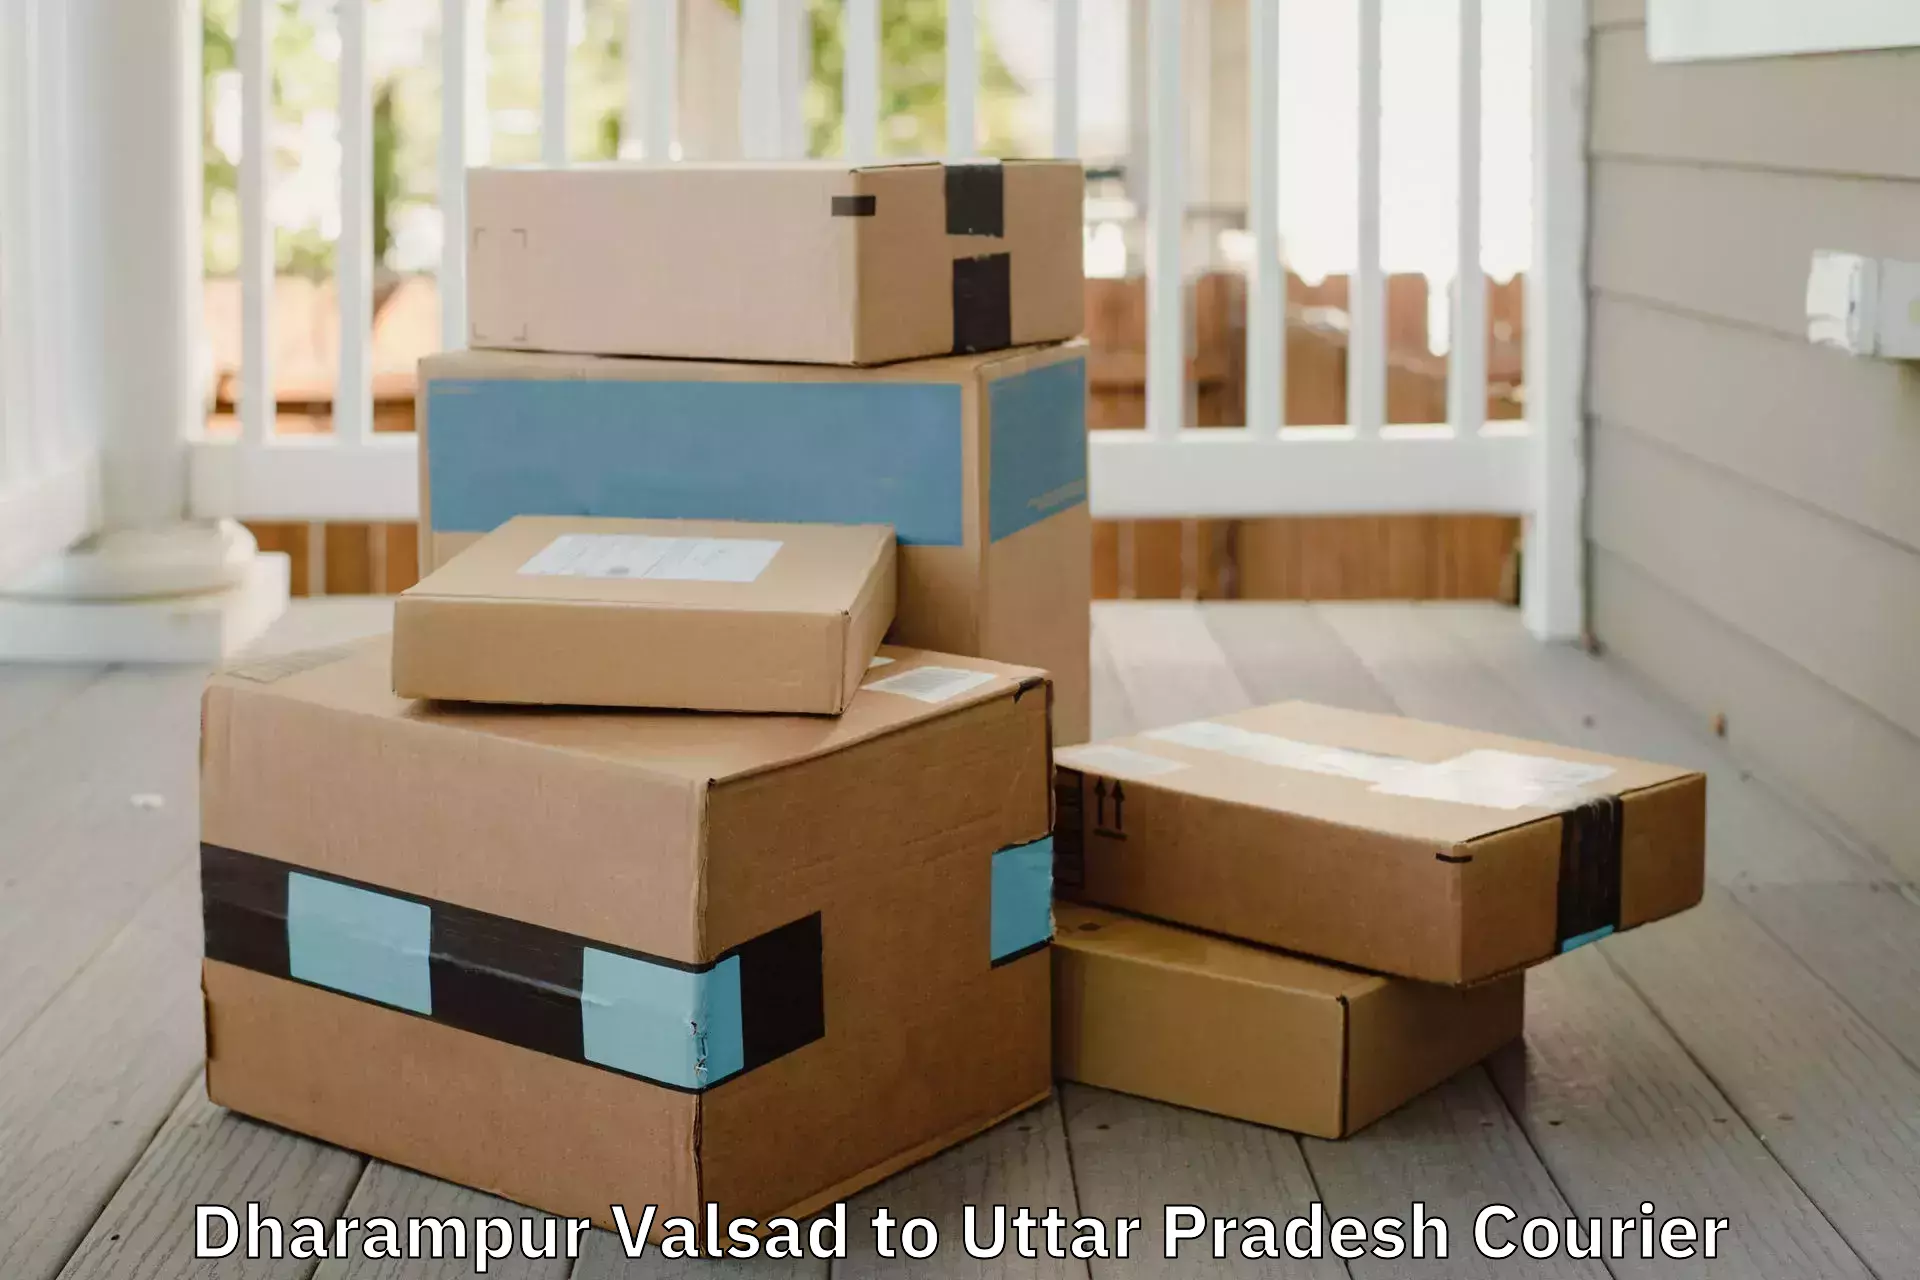 Reliable relocation services Dharampur Valsad to Dhampur